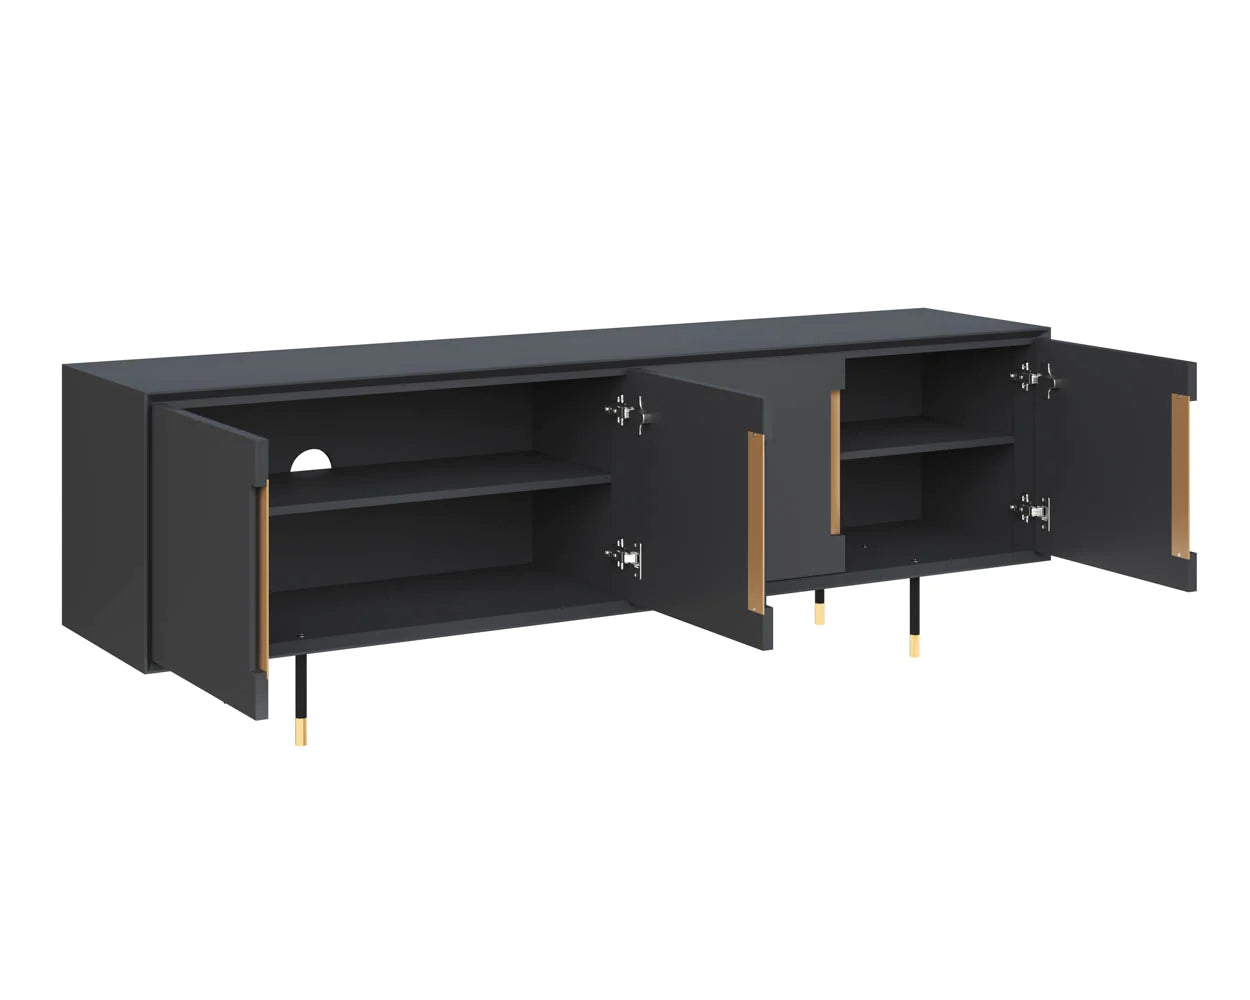 DANBURY MEDIA CONSOLE AND CABINET - SLATE NAVY